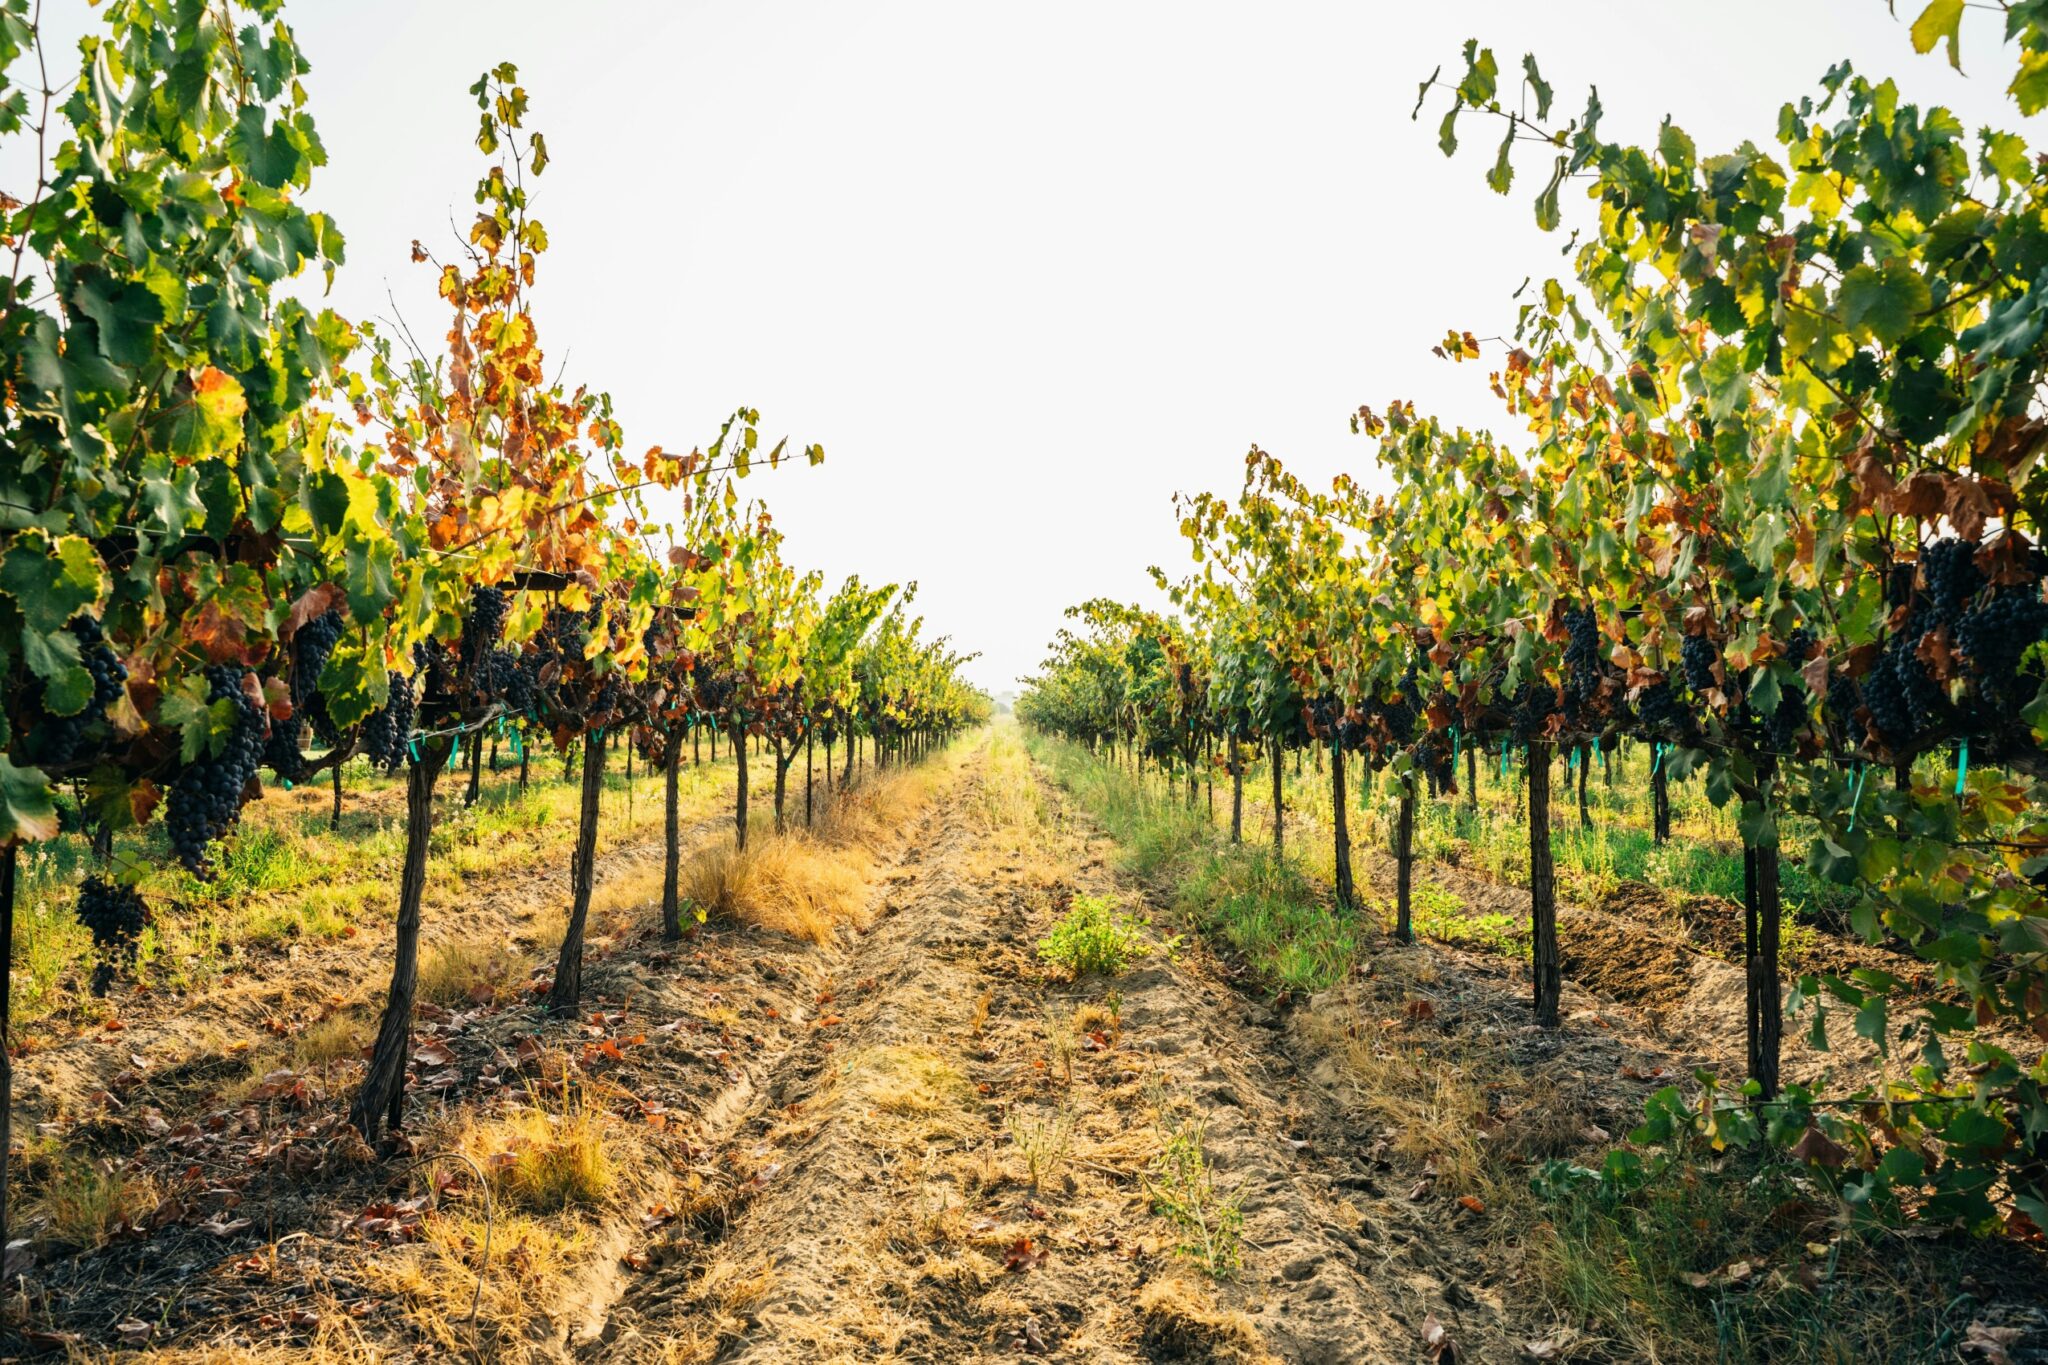 Where to Find California’s Most Underrated Vineyards